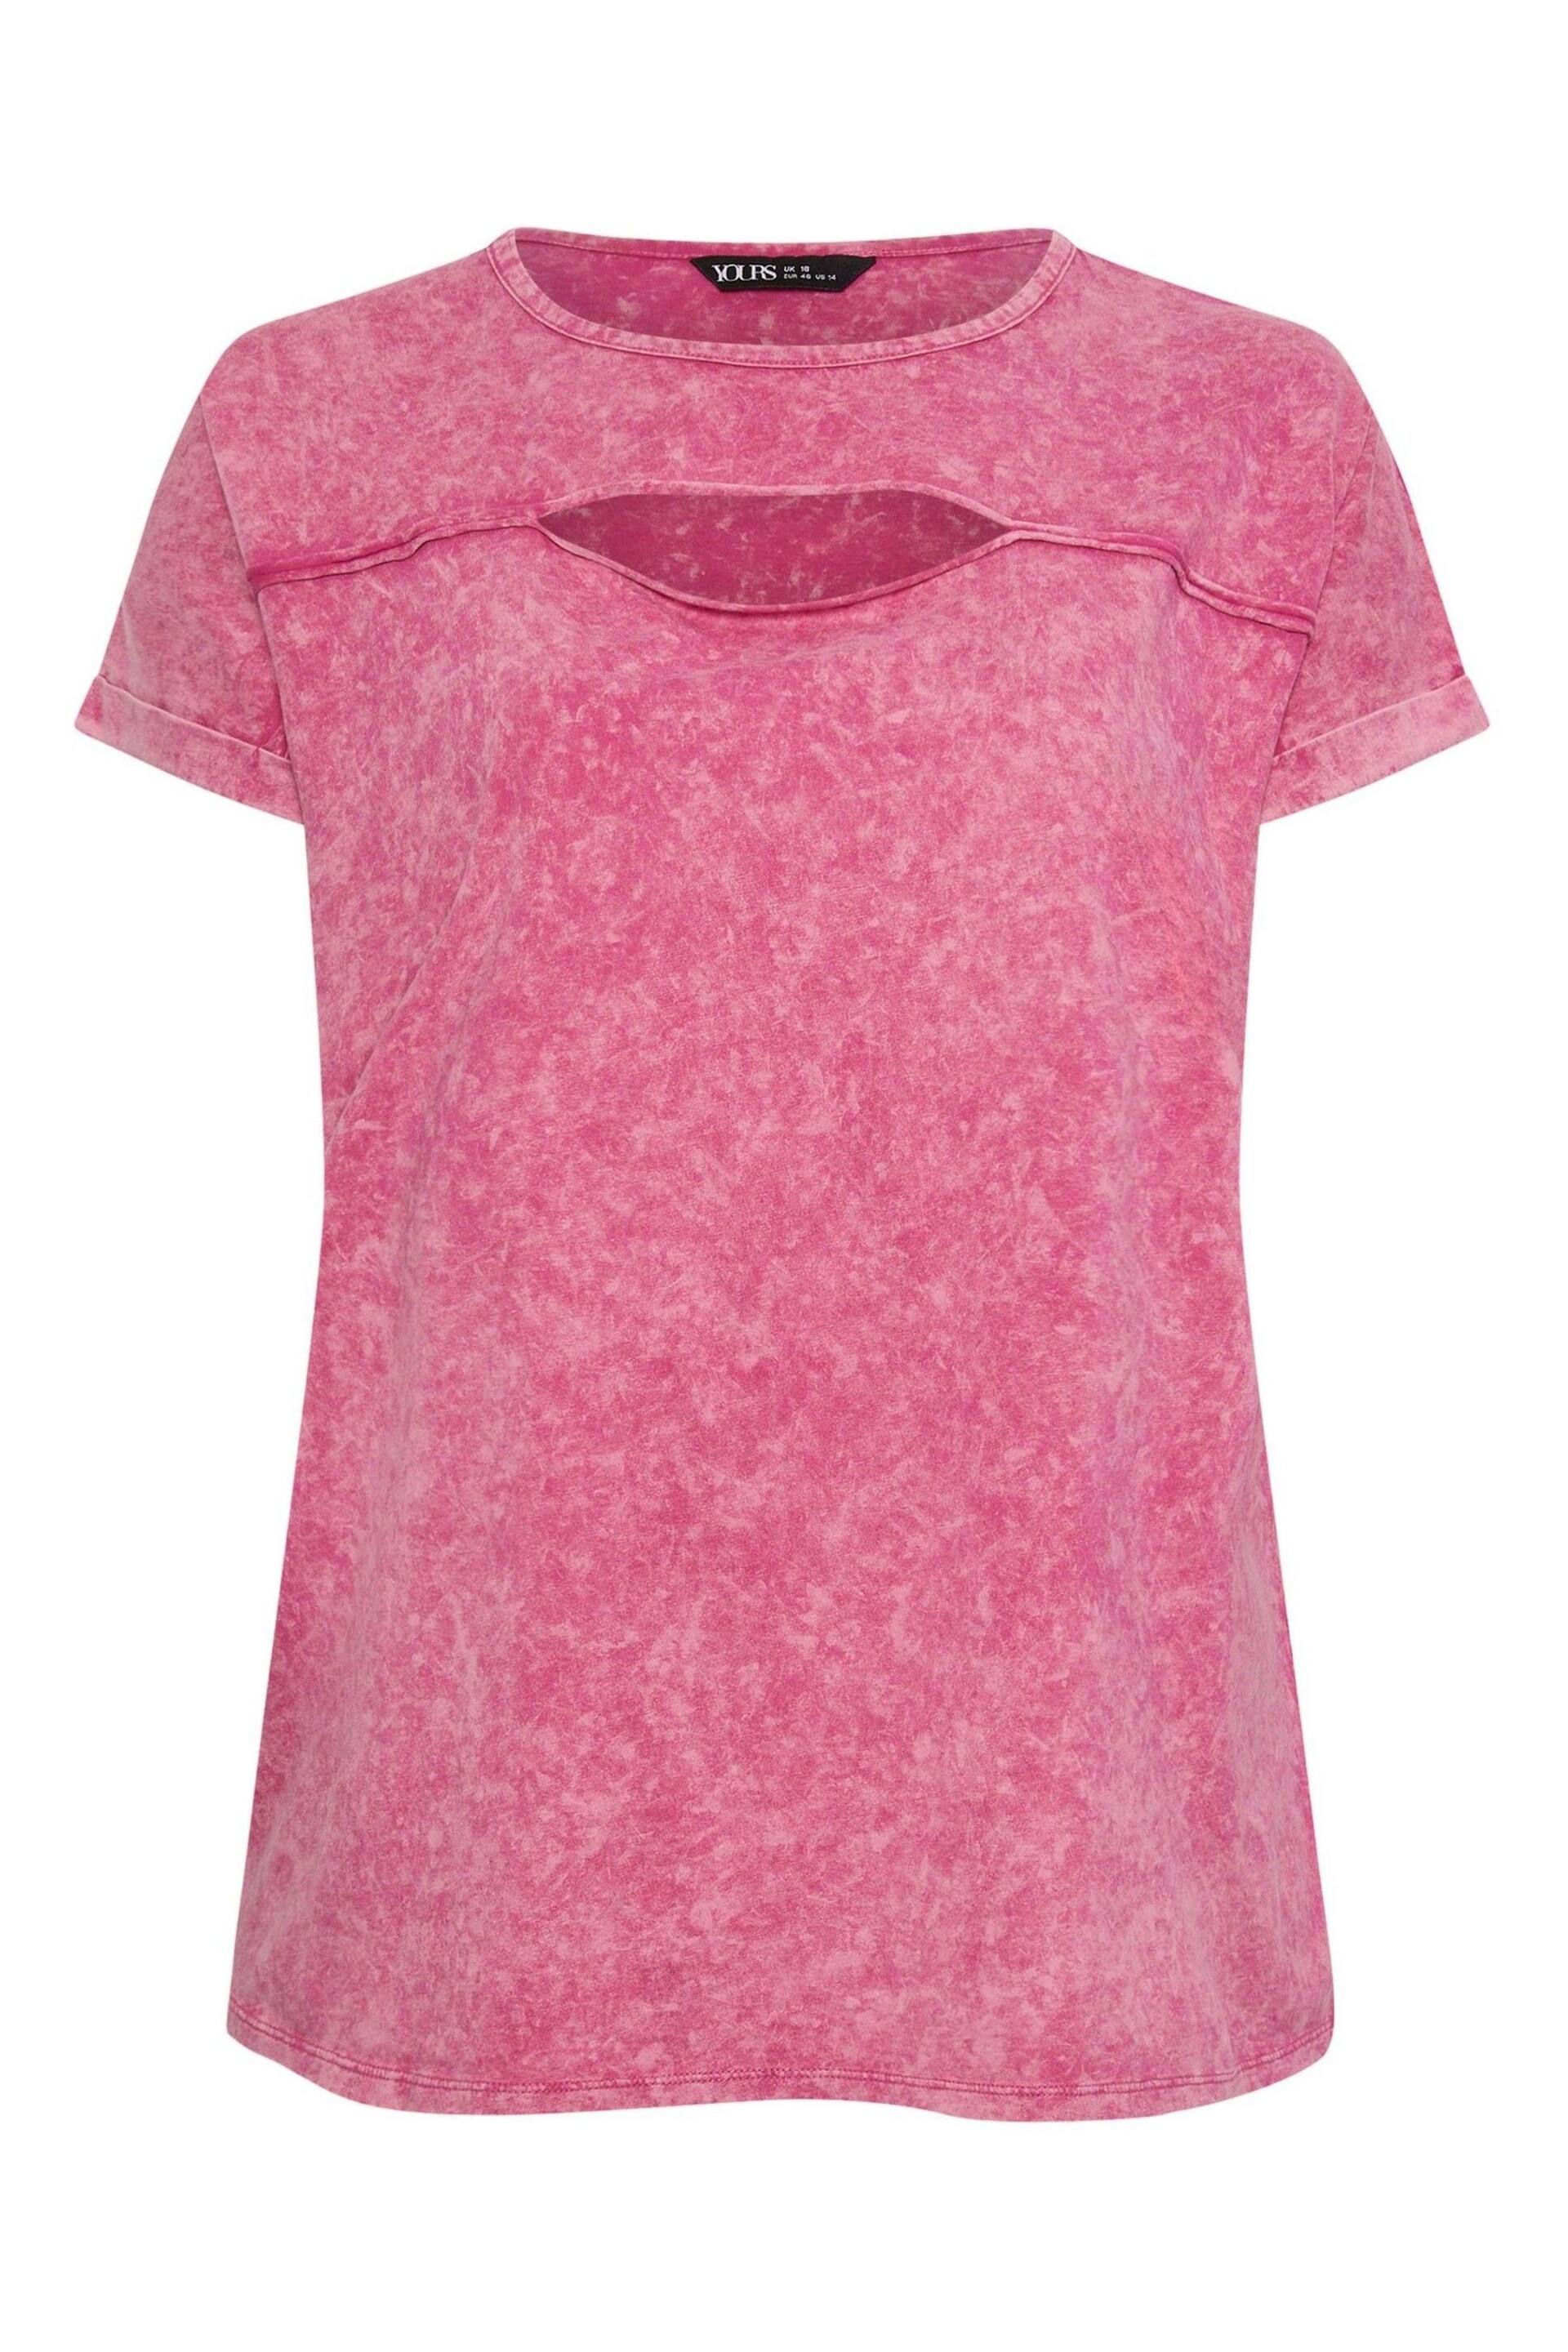 Yours Curve Pink Acid Wash Cut Out T-Shirt - Image 5 of 5